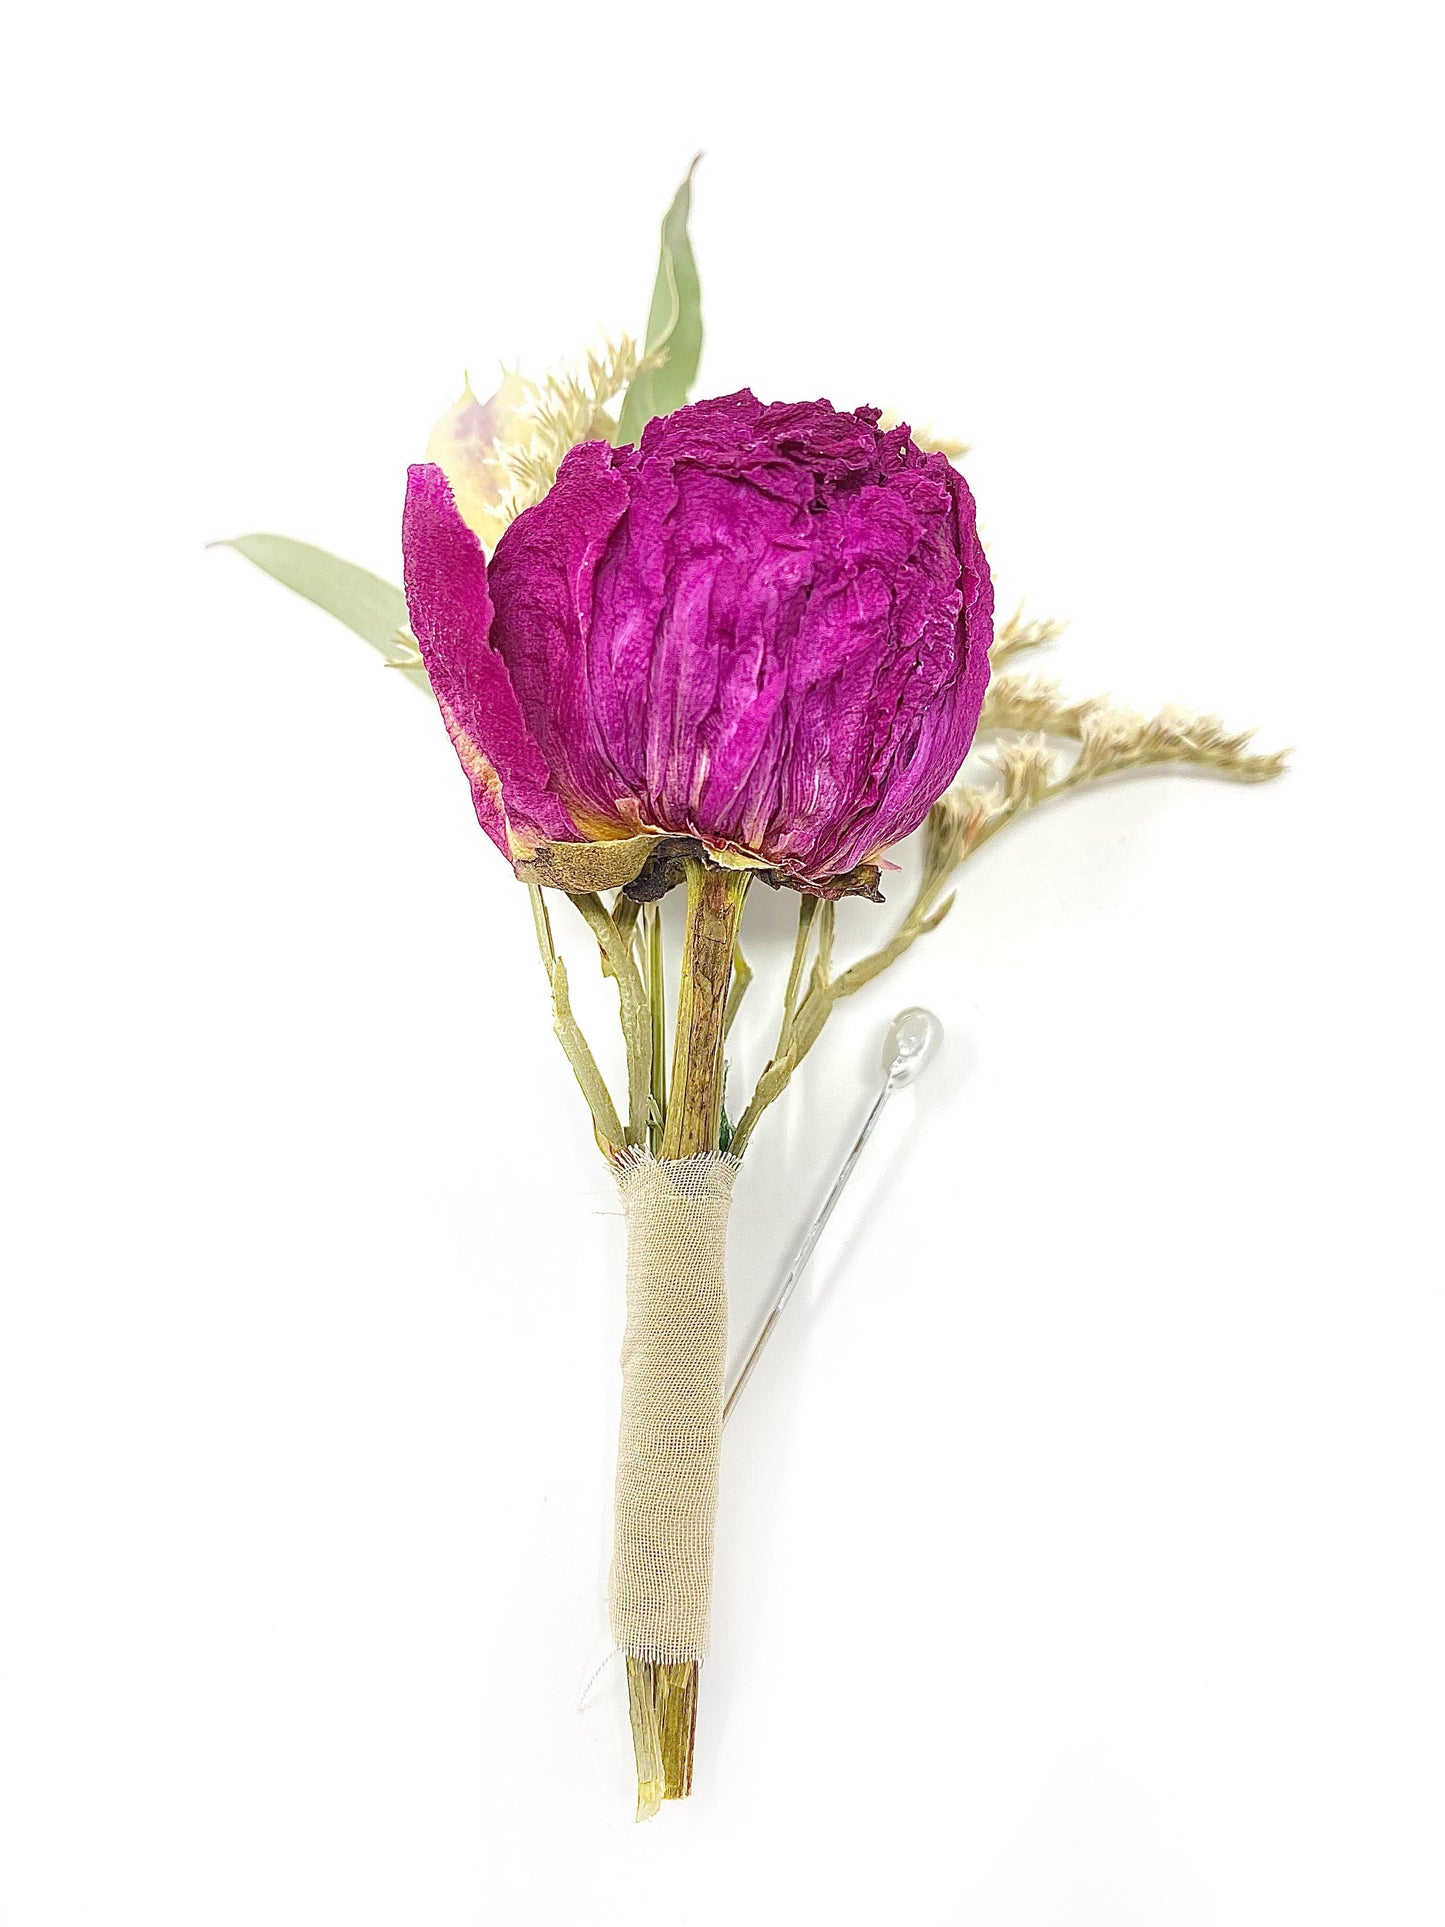 Wedding Boutonniere, Dried Flowers, Preserved Floral, Peony, Decor, Bridal Accessories, German Statice, Greenery, Purple and Green